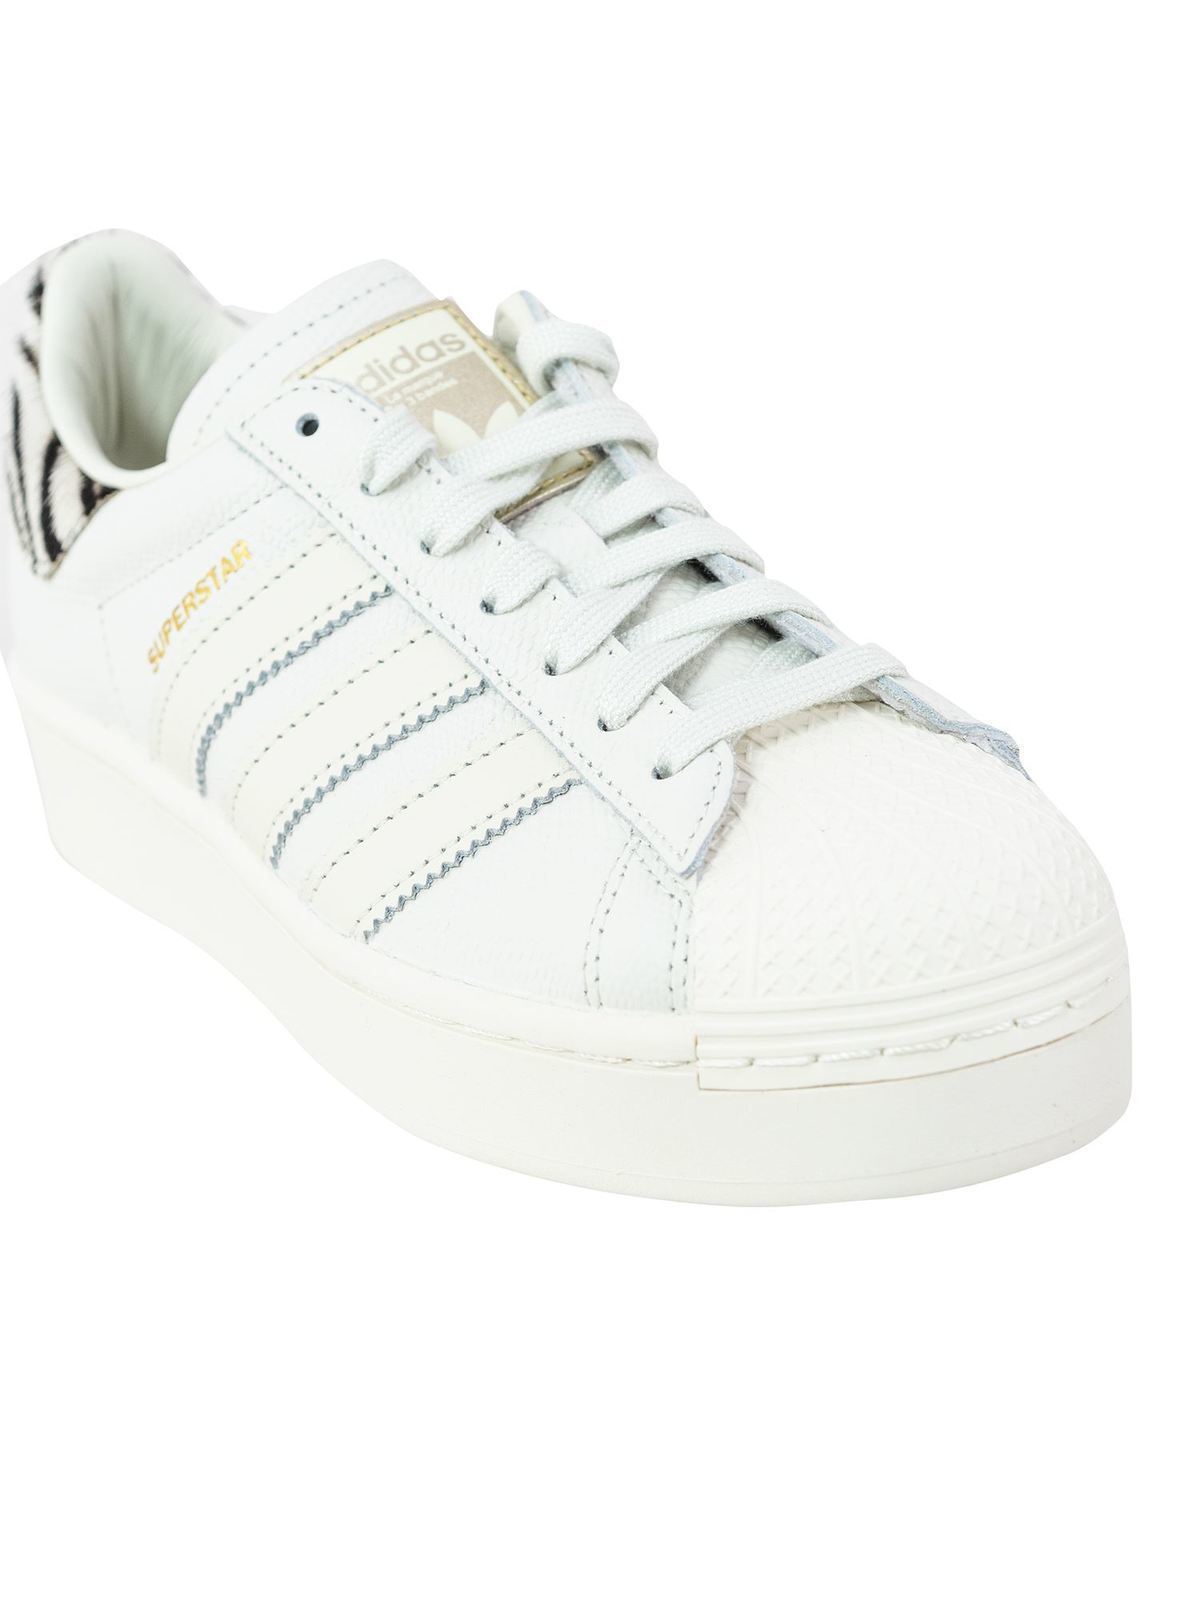 Sneakers Adidas Originals - Sneakers Superstar Bold bianche e ...